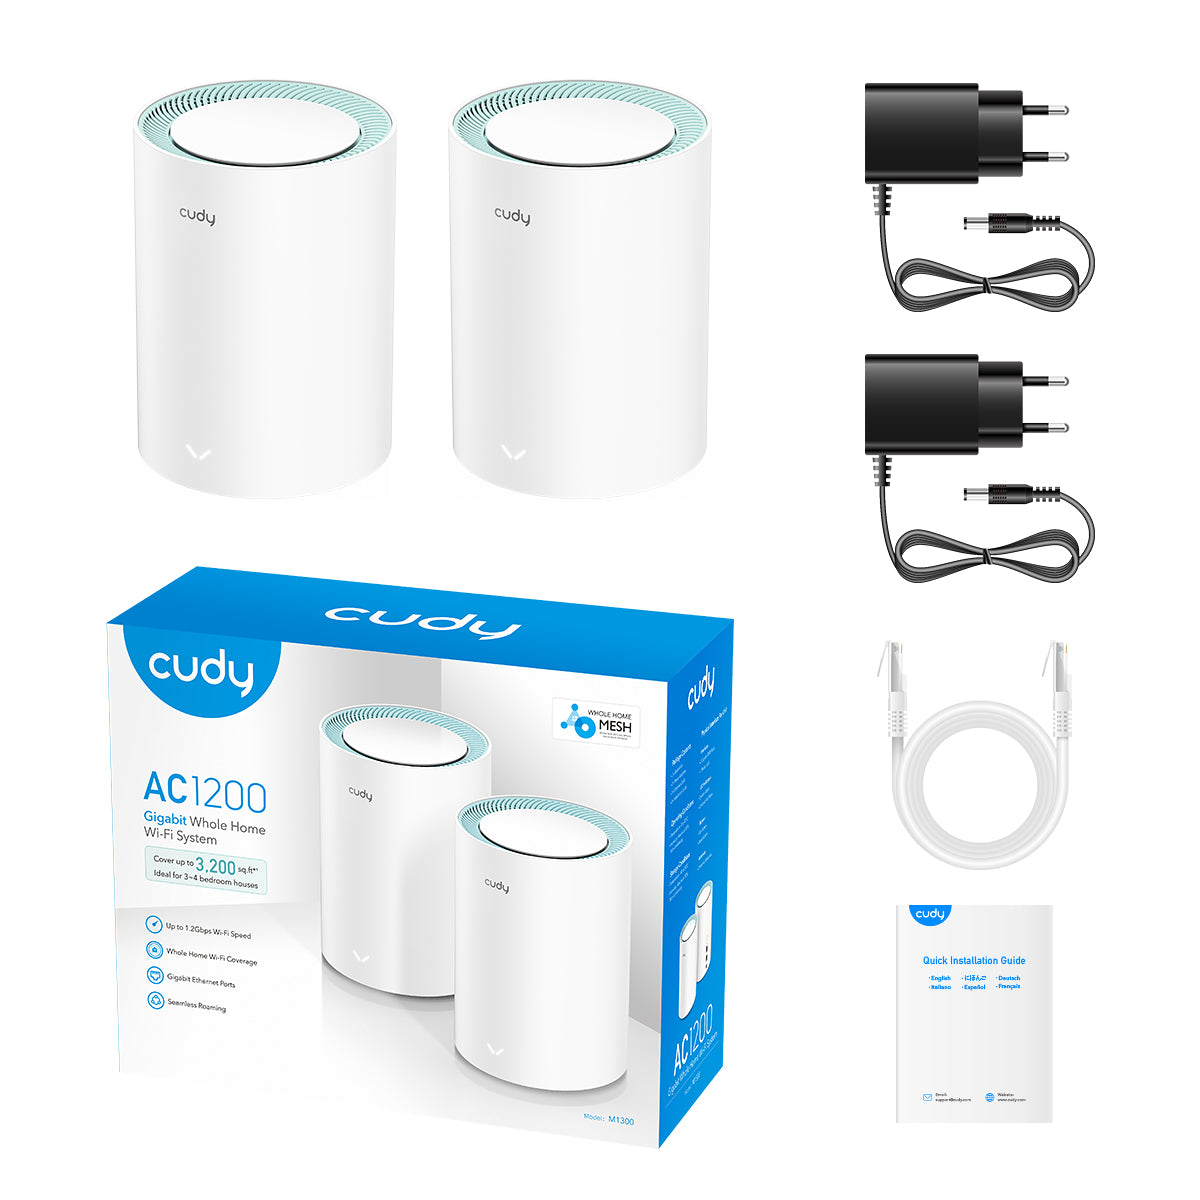 Cudy Dual Band WiFi 5 1200Mbps Gigabit Mesh Router 2 Pack | M1300 (2-Pack)